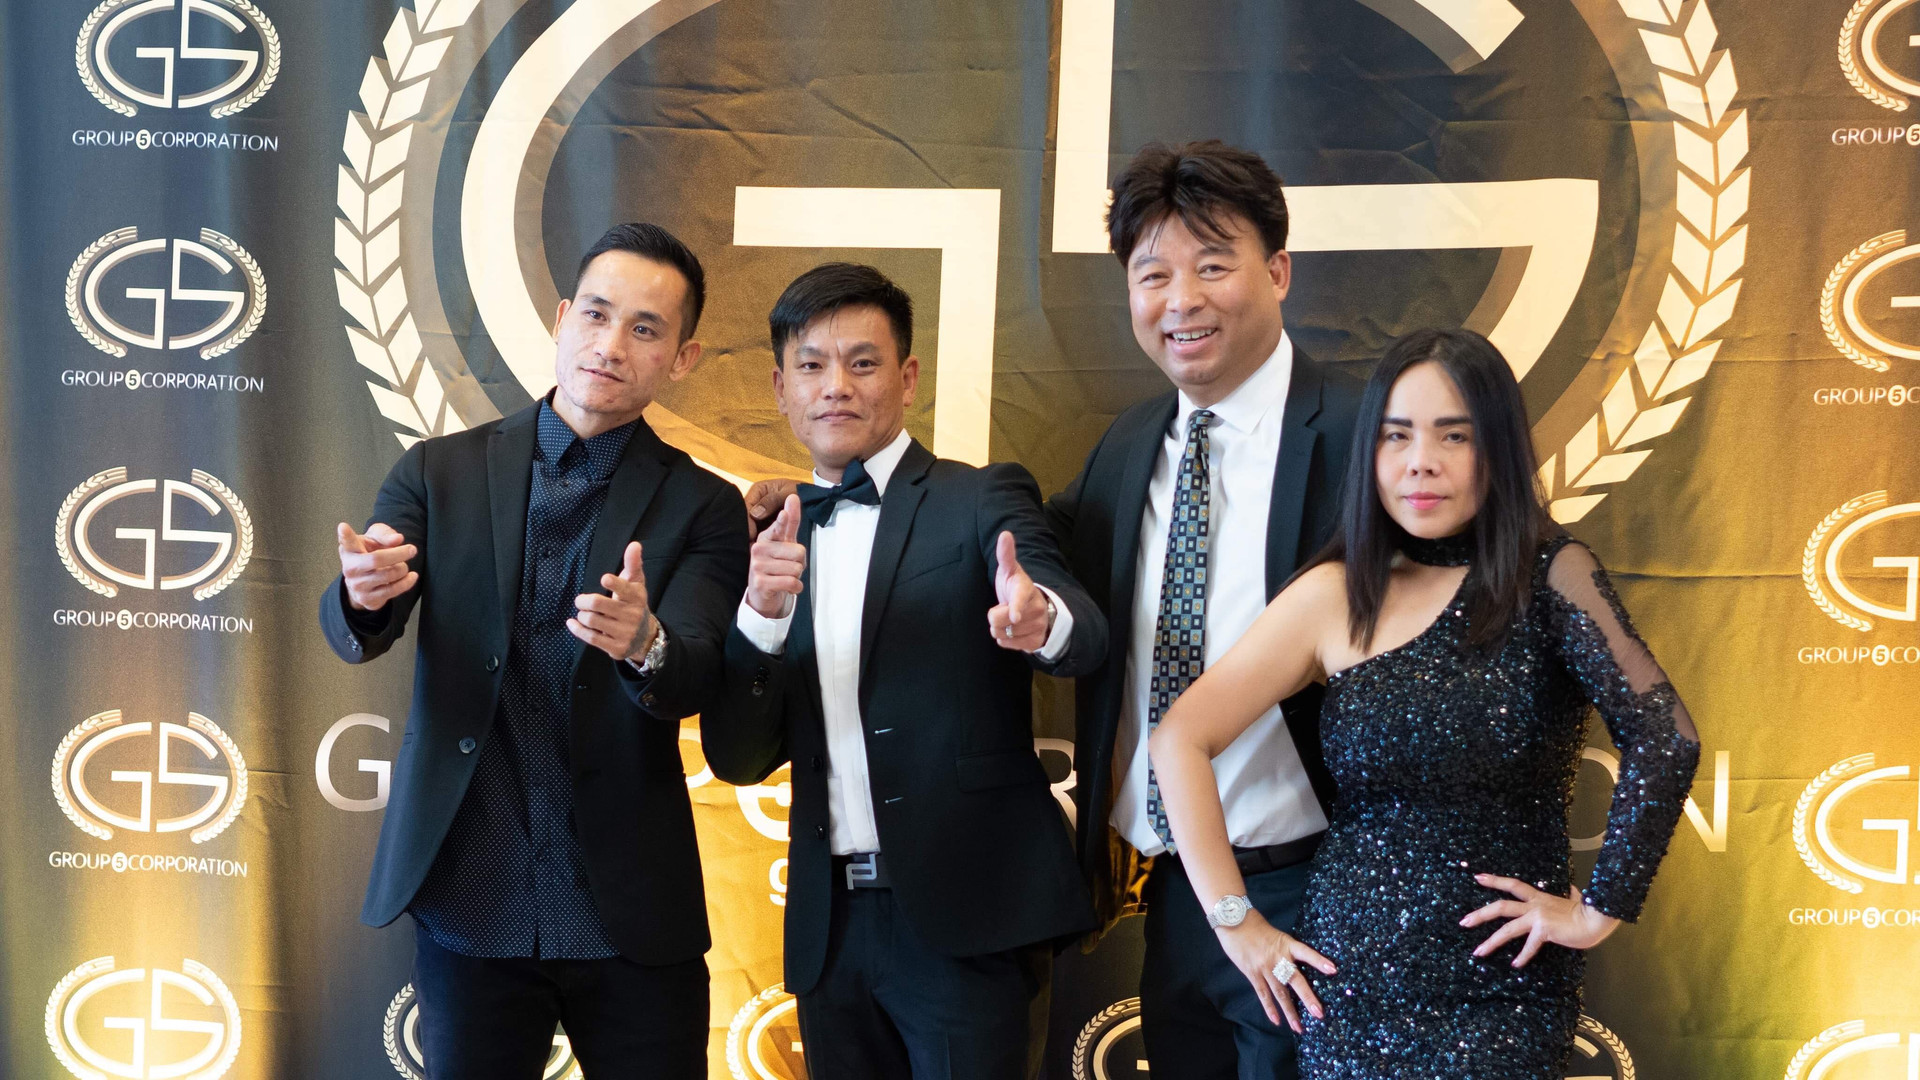 Group5 Corporation tổ chức thành công Business Networking Mixer